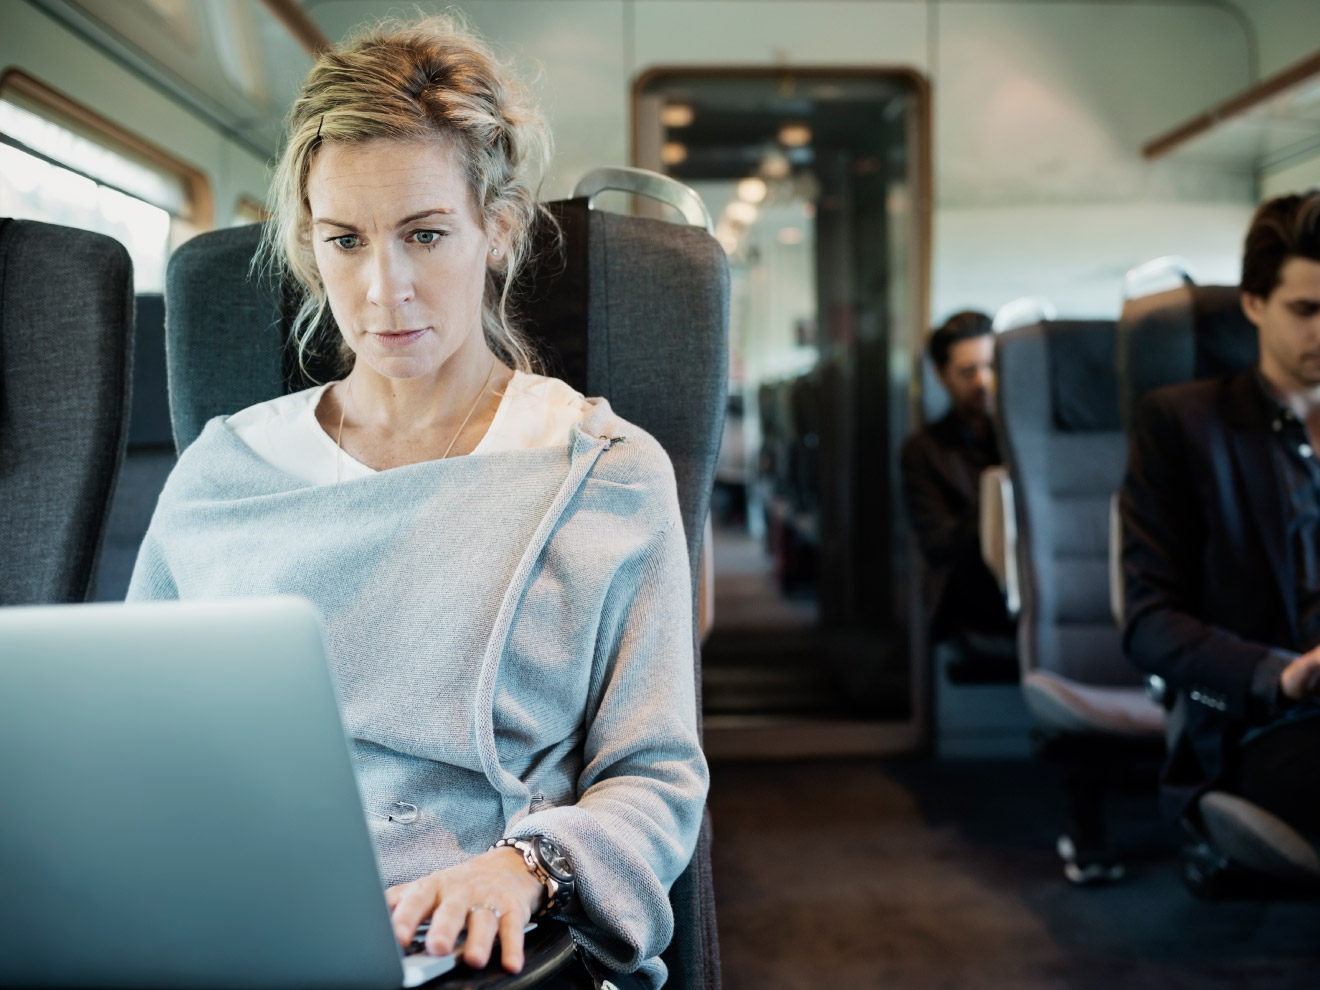 A woman works on her laptop on a plane, able to fully focus without leak anxiety thanks to her travel prep. 